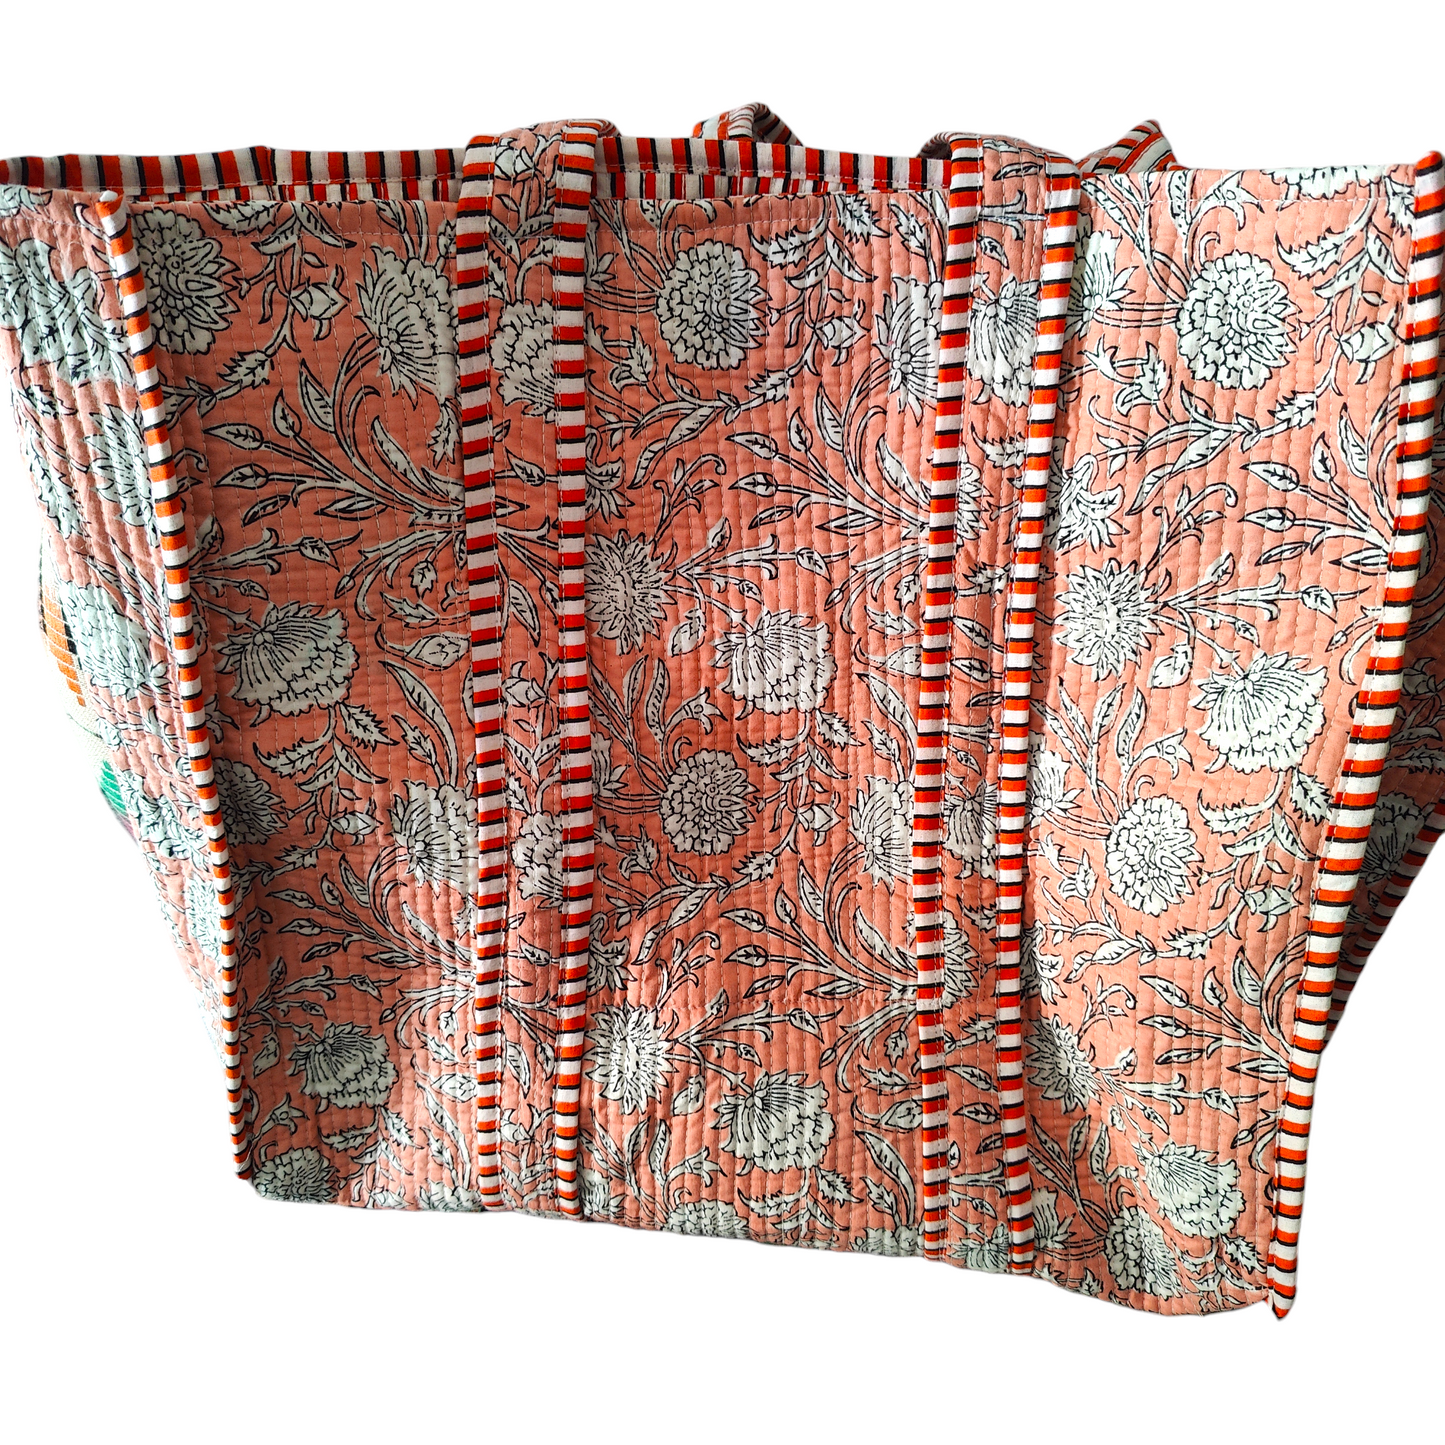 Handmade Quilted Tote Bag - Peach Paisley